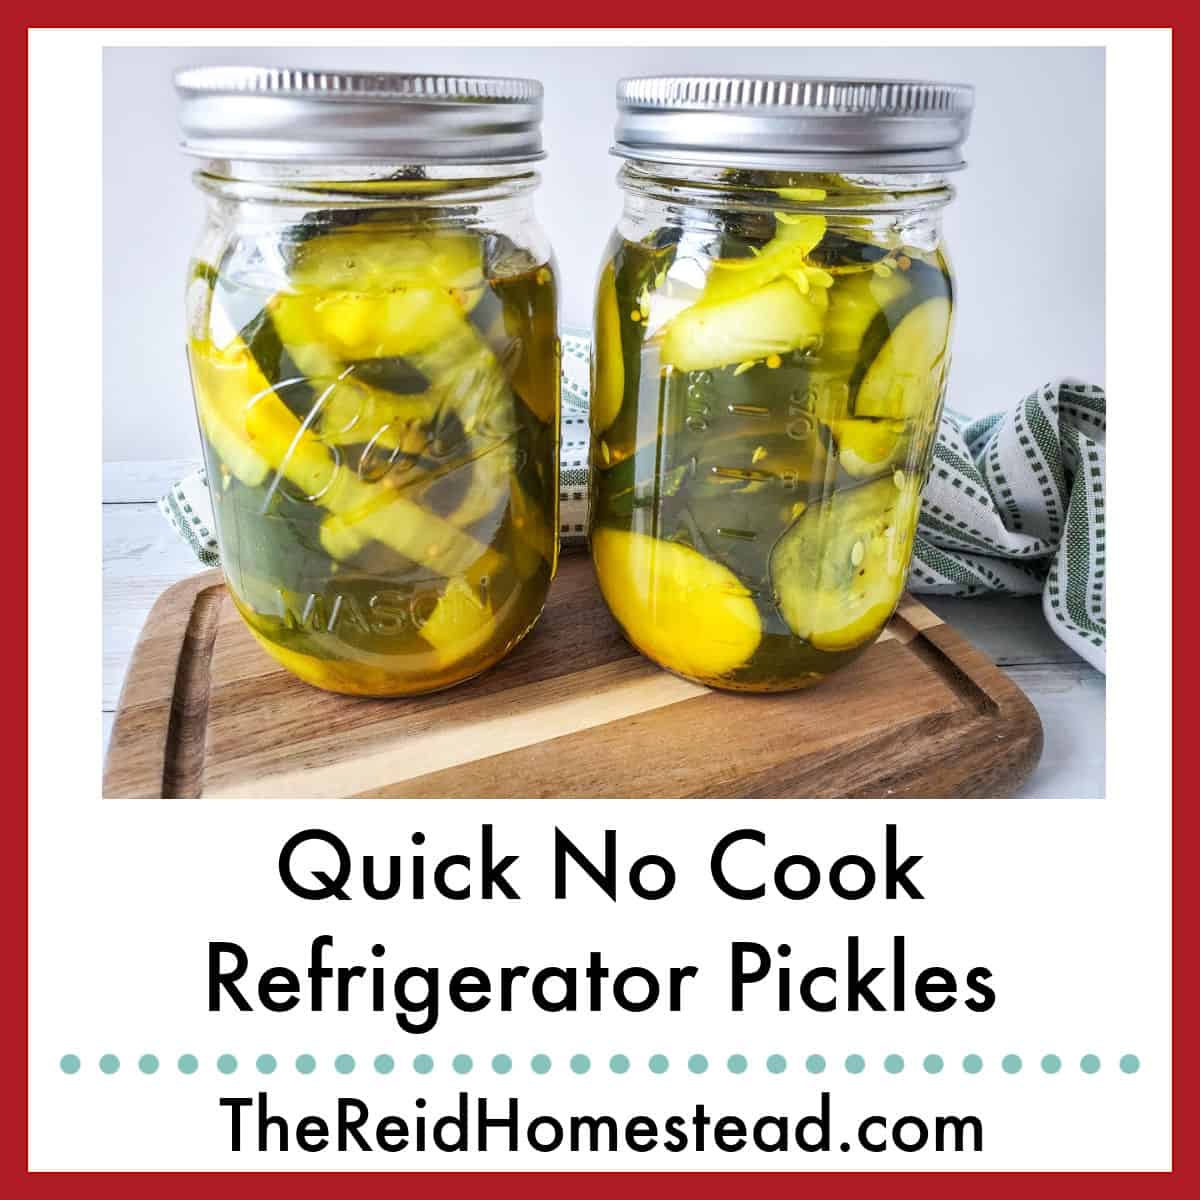 2 mason jars full of refrigerator pickles sitting on a cutting board, text overlay Quick No Cook Refrigerator Pickles